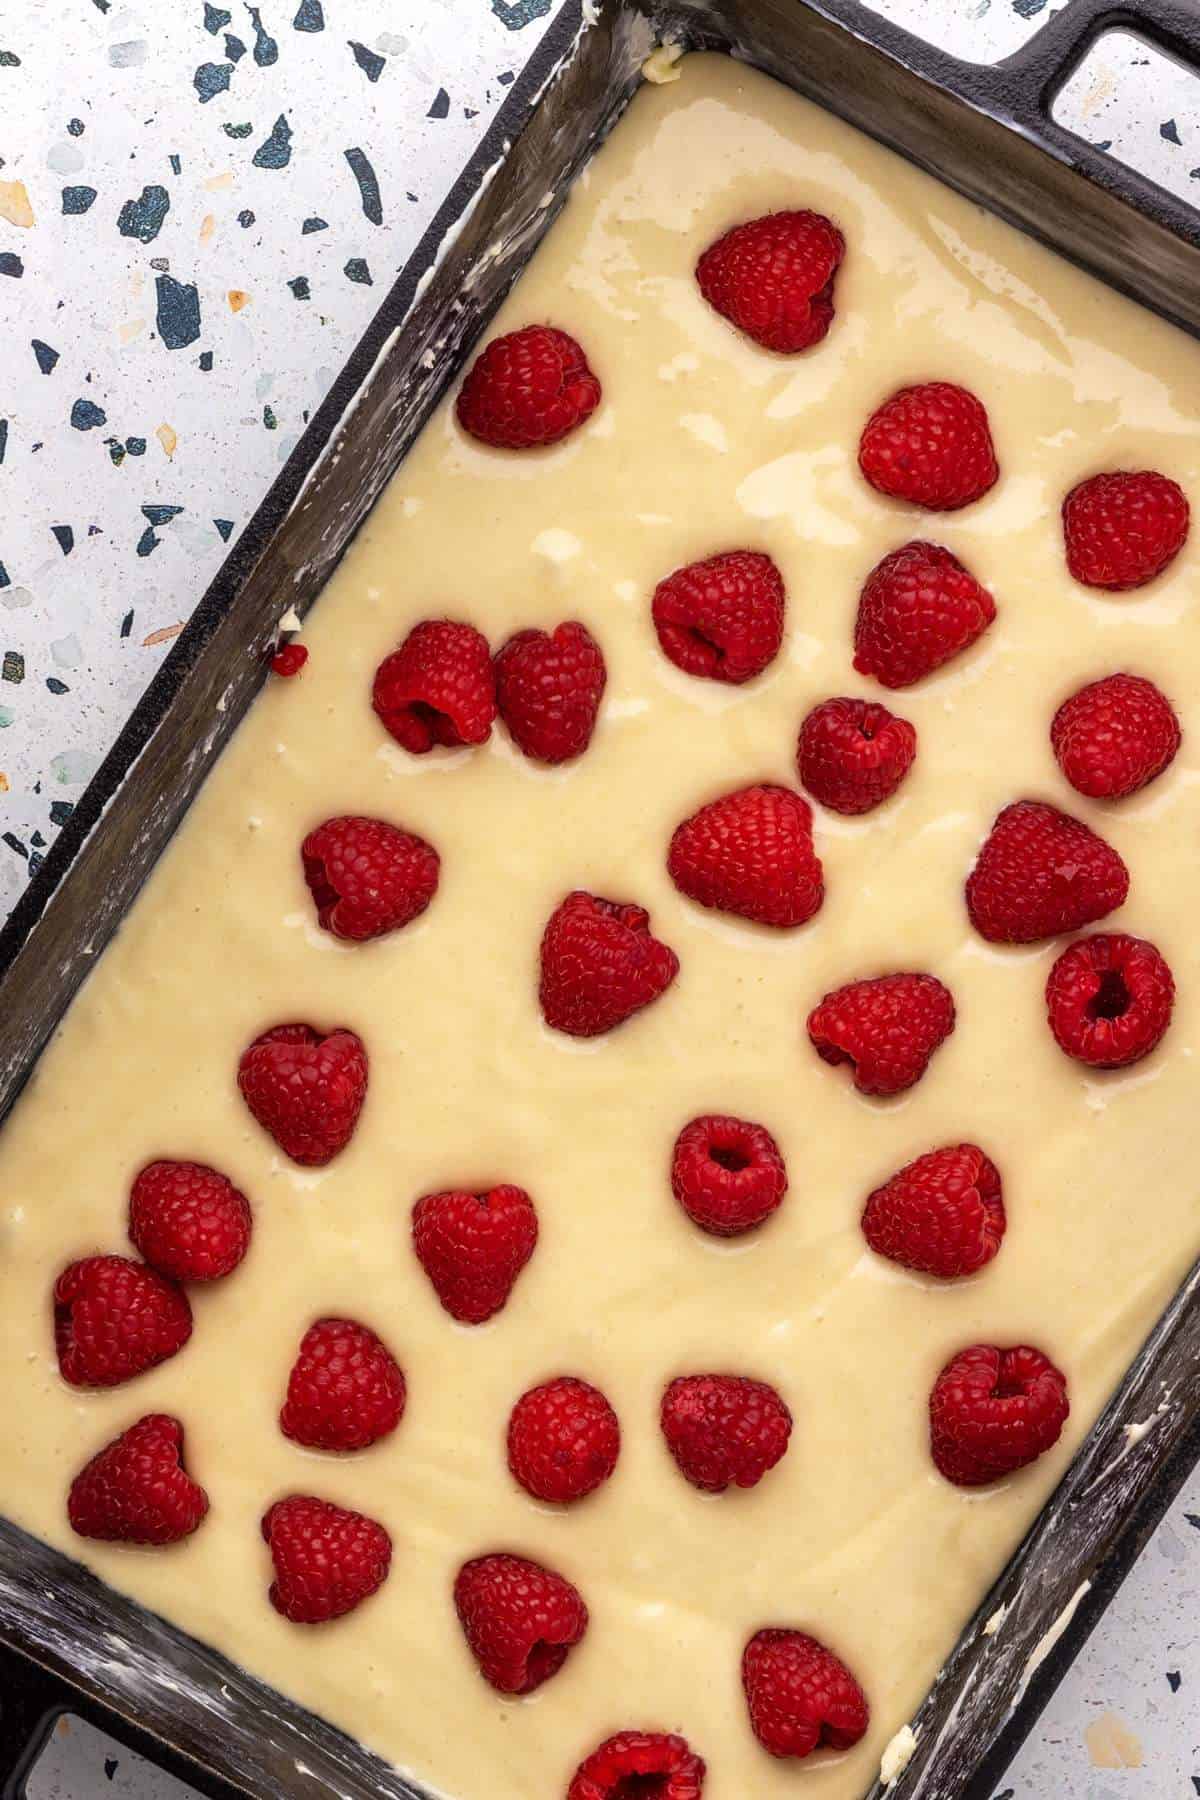 Cake batter with raspberries on top in cast iron skillet.